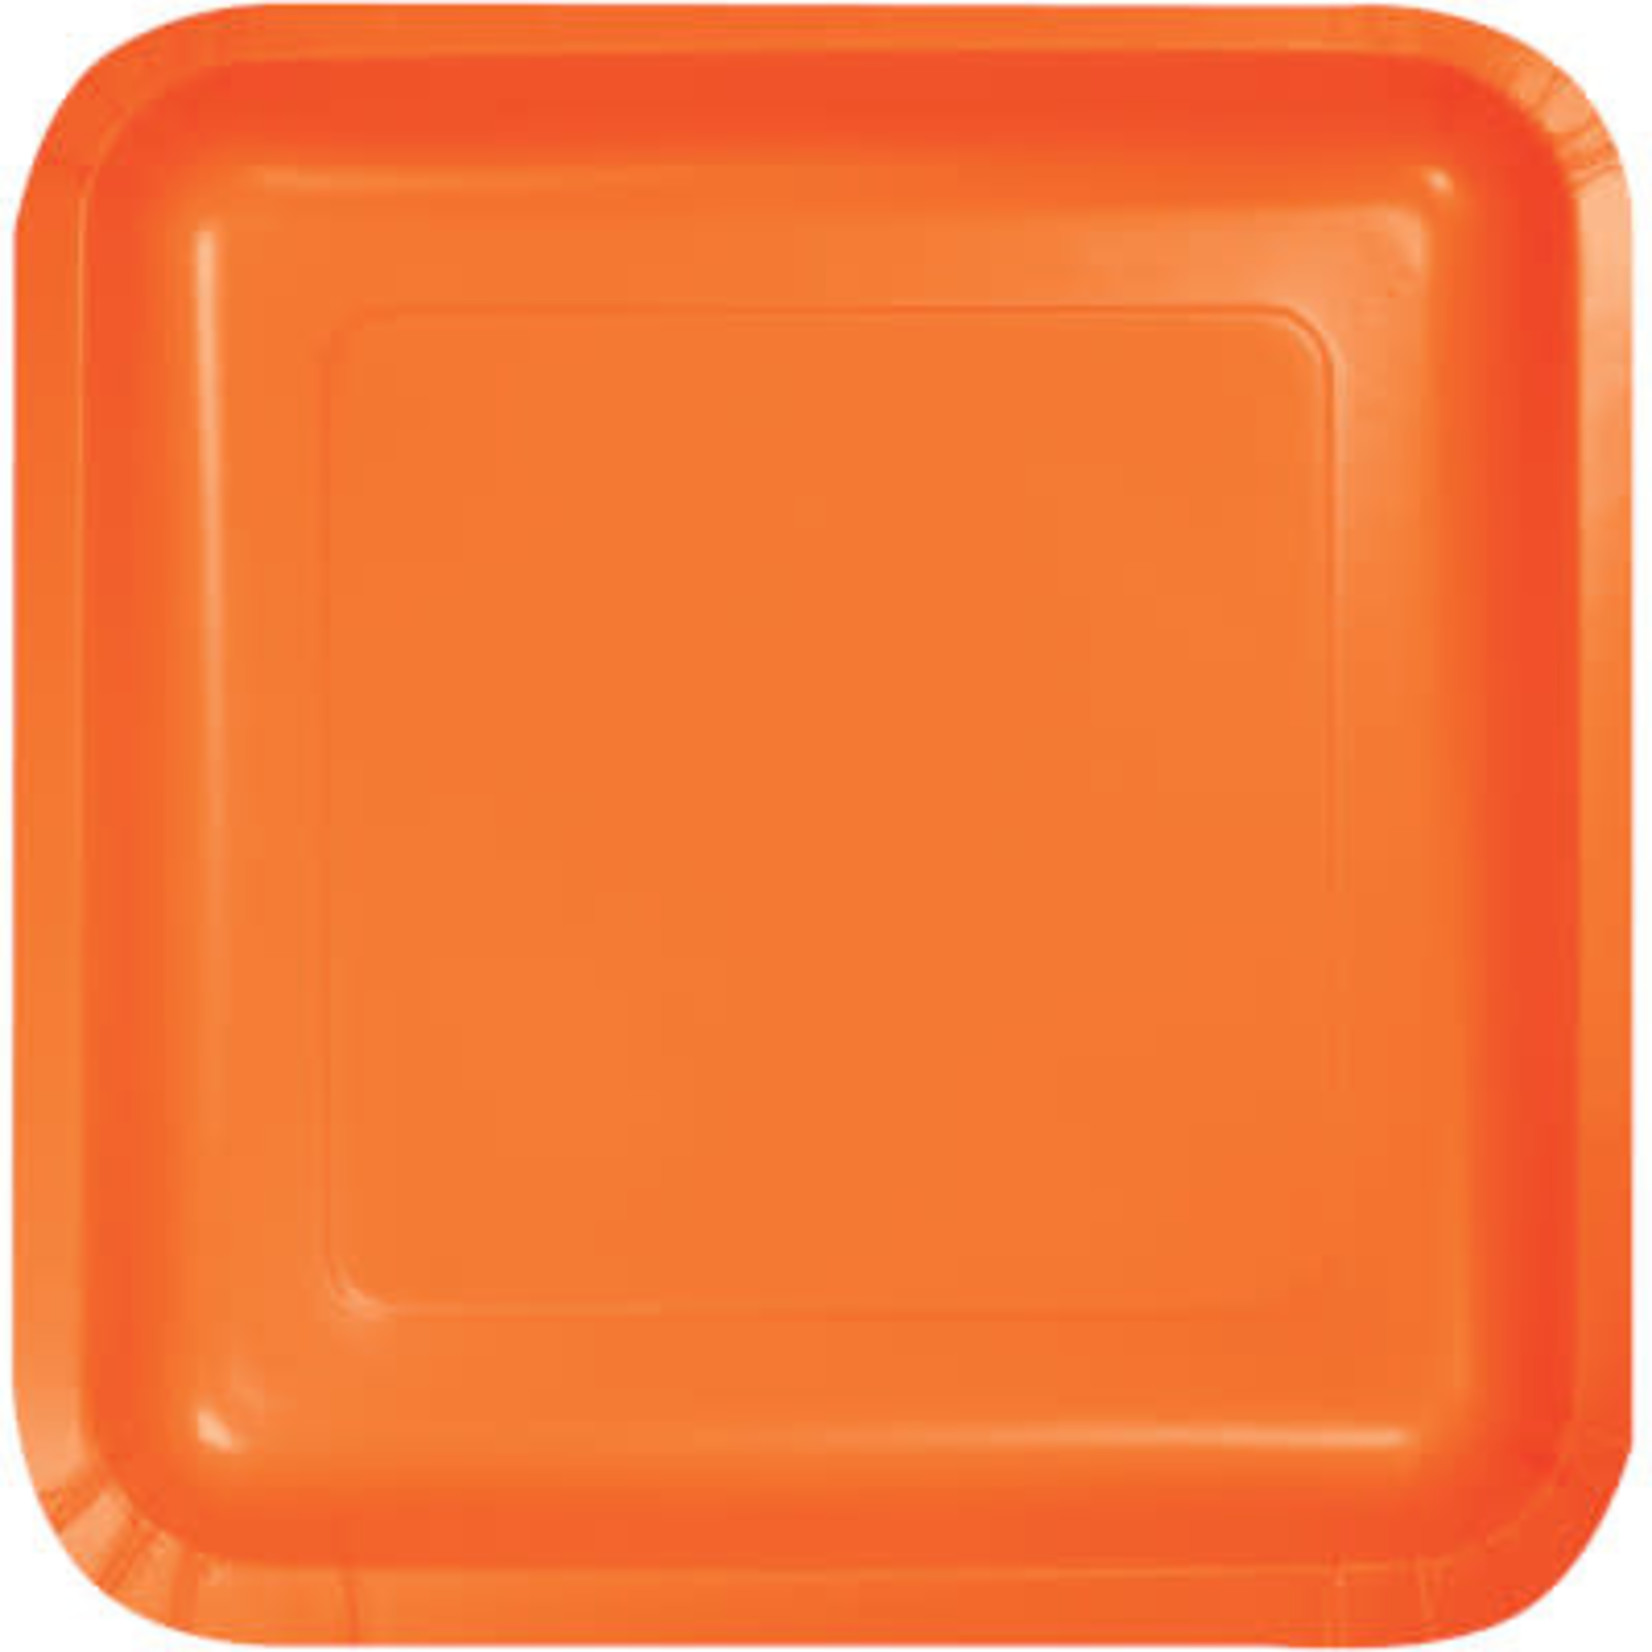 Touch of Color 7" Sunkissed Orange Square Paper Plates - 18ct.